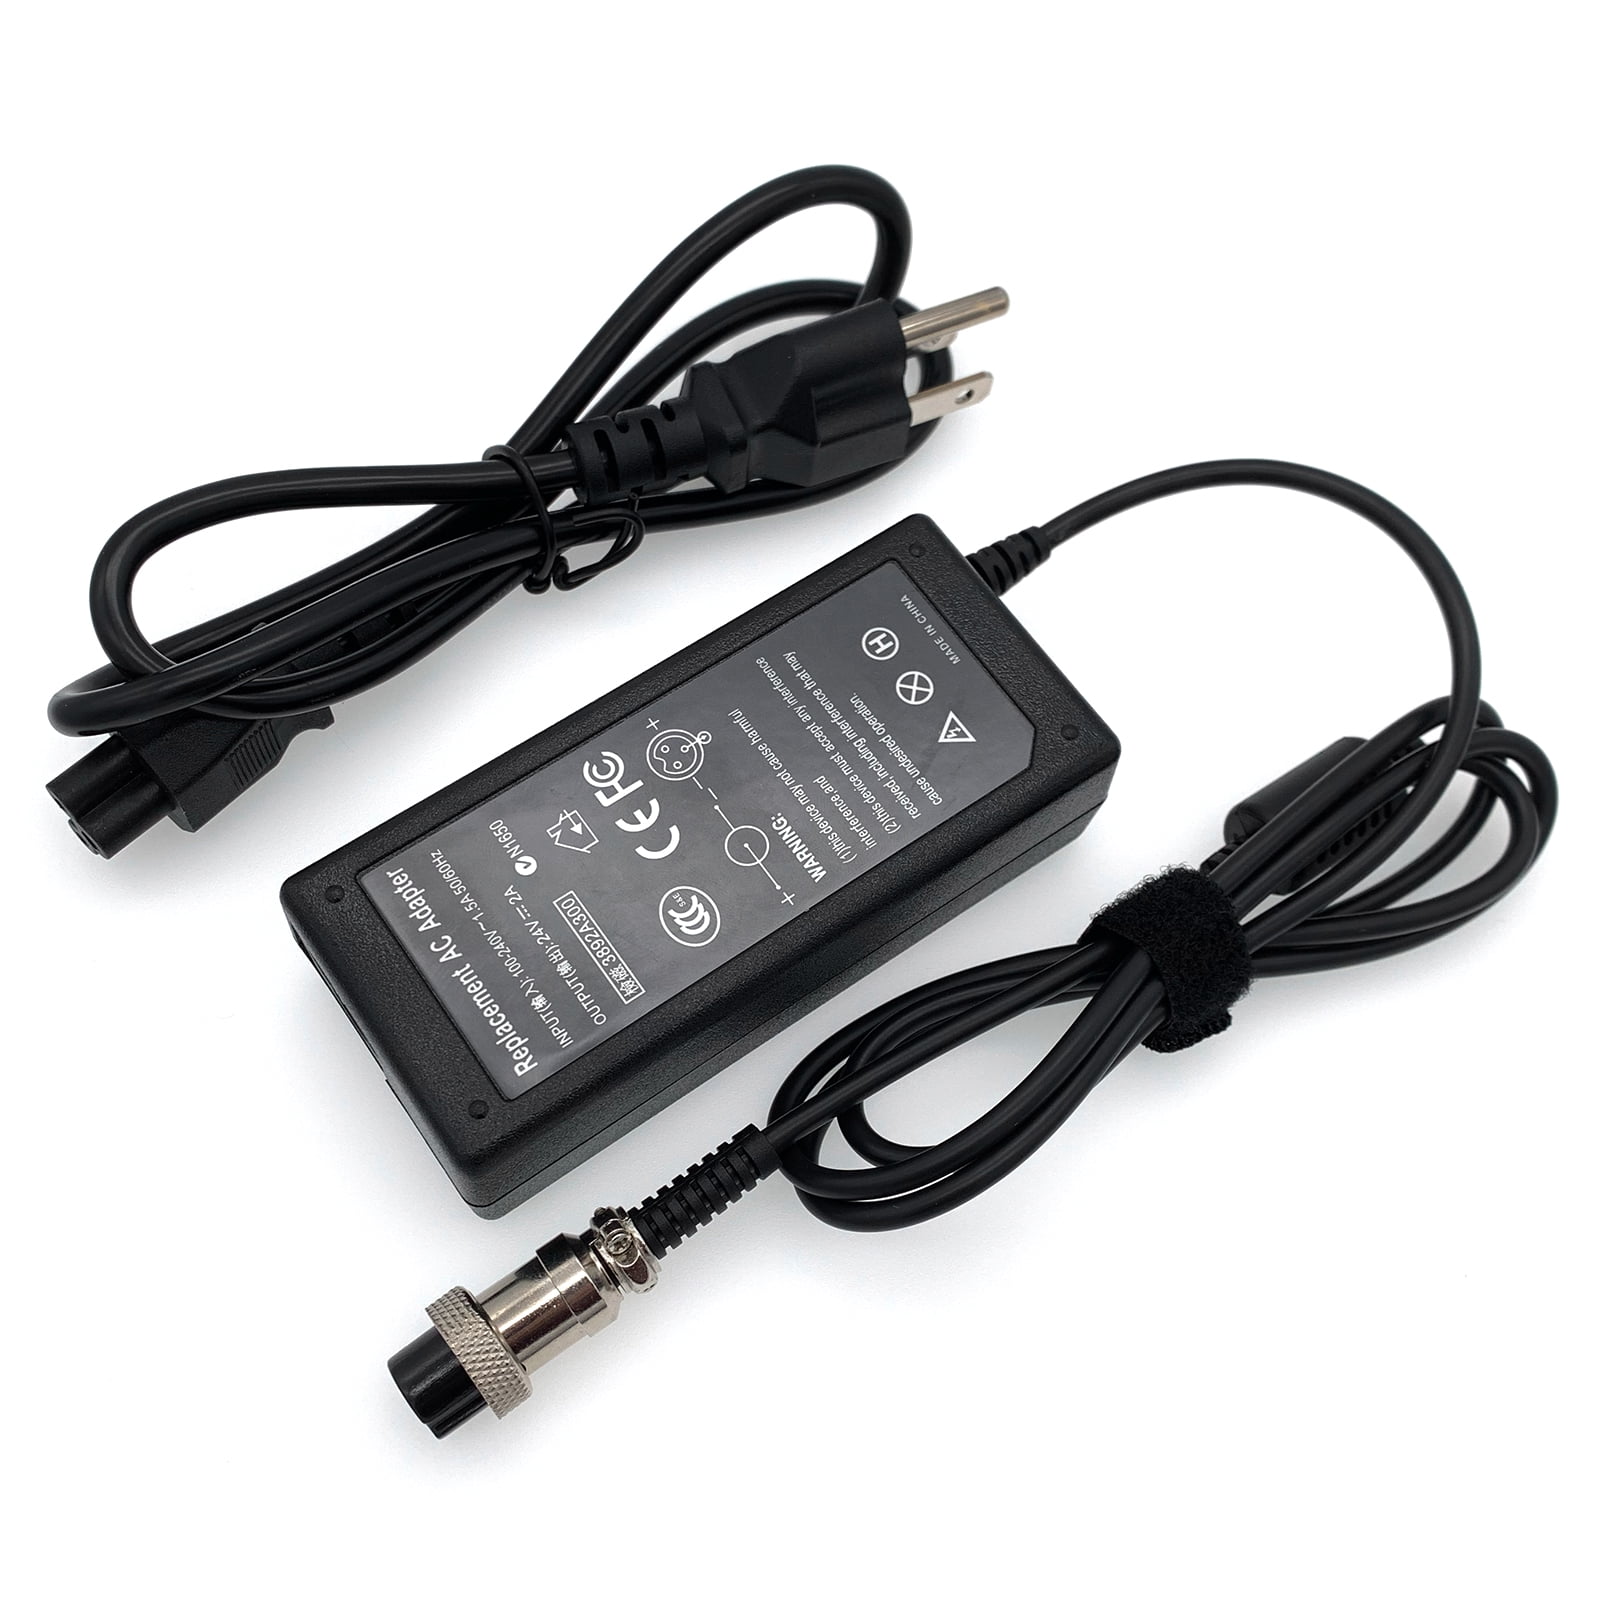 Razor iMod scooter Ride-On bike battery power supply ac adapter cord charger 